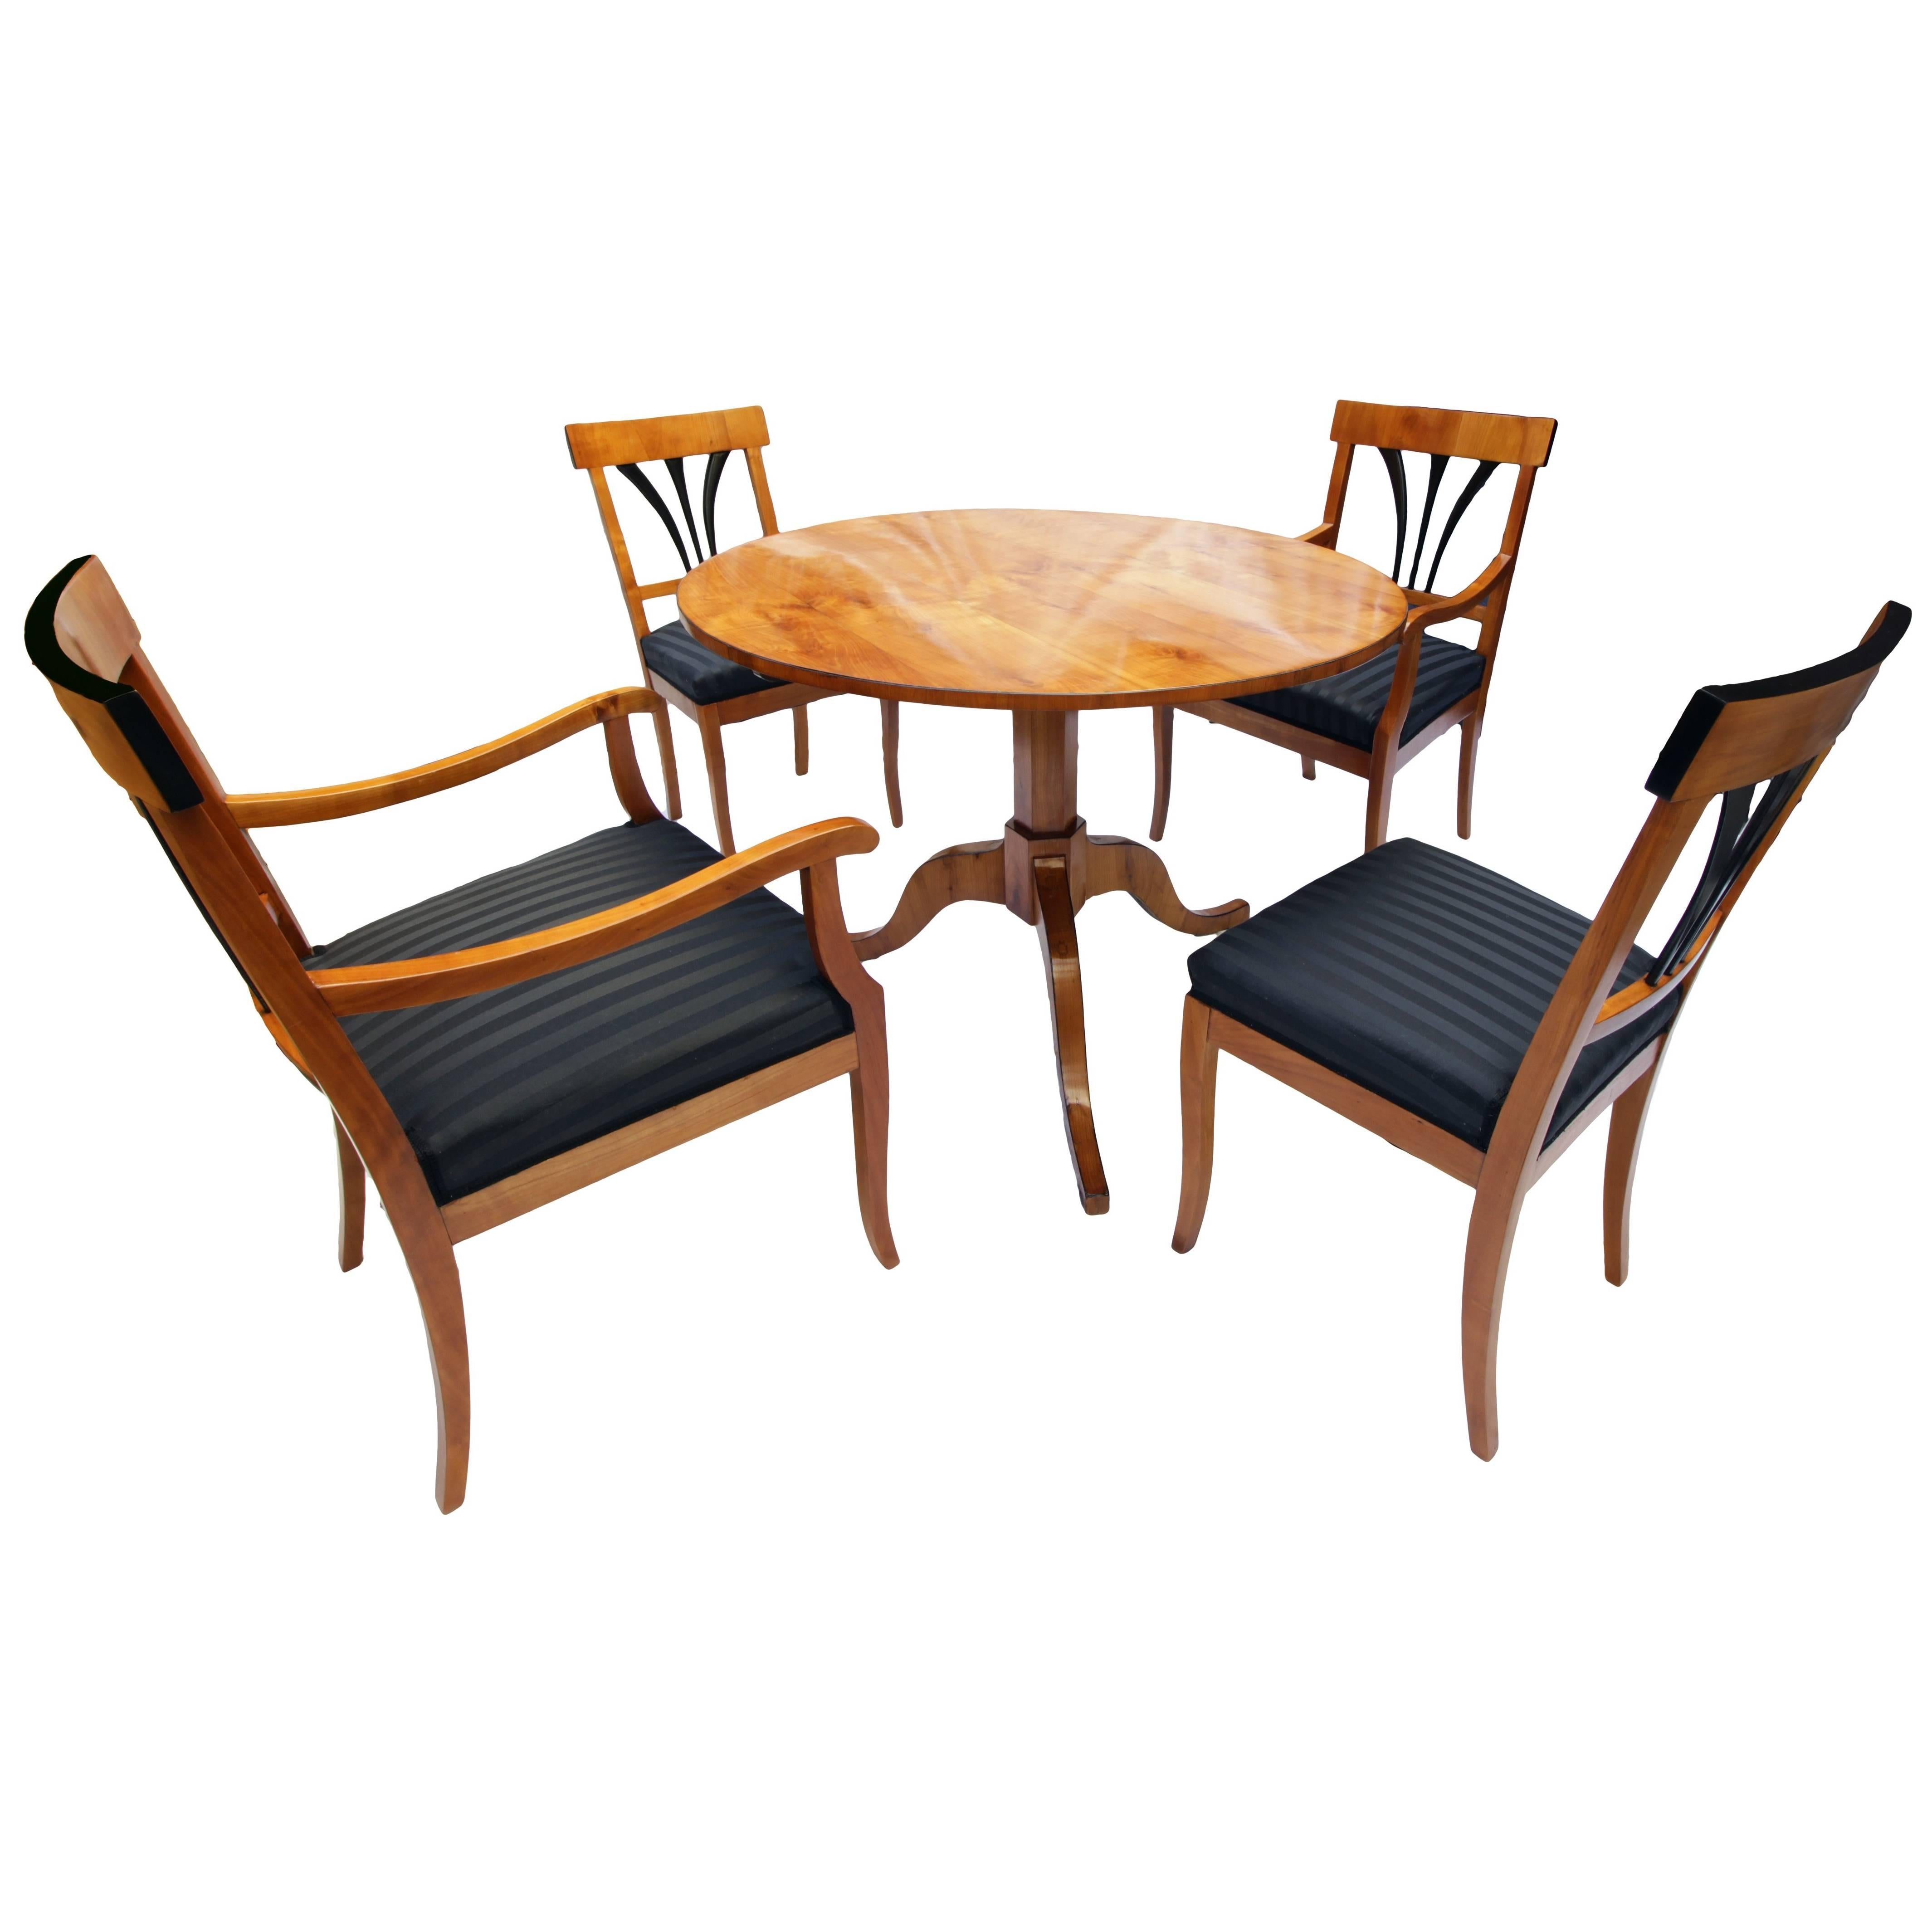 Biedermeier Dining Room Set, One Table, Two Armchairs, Two Chairs